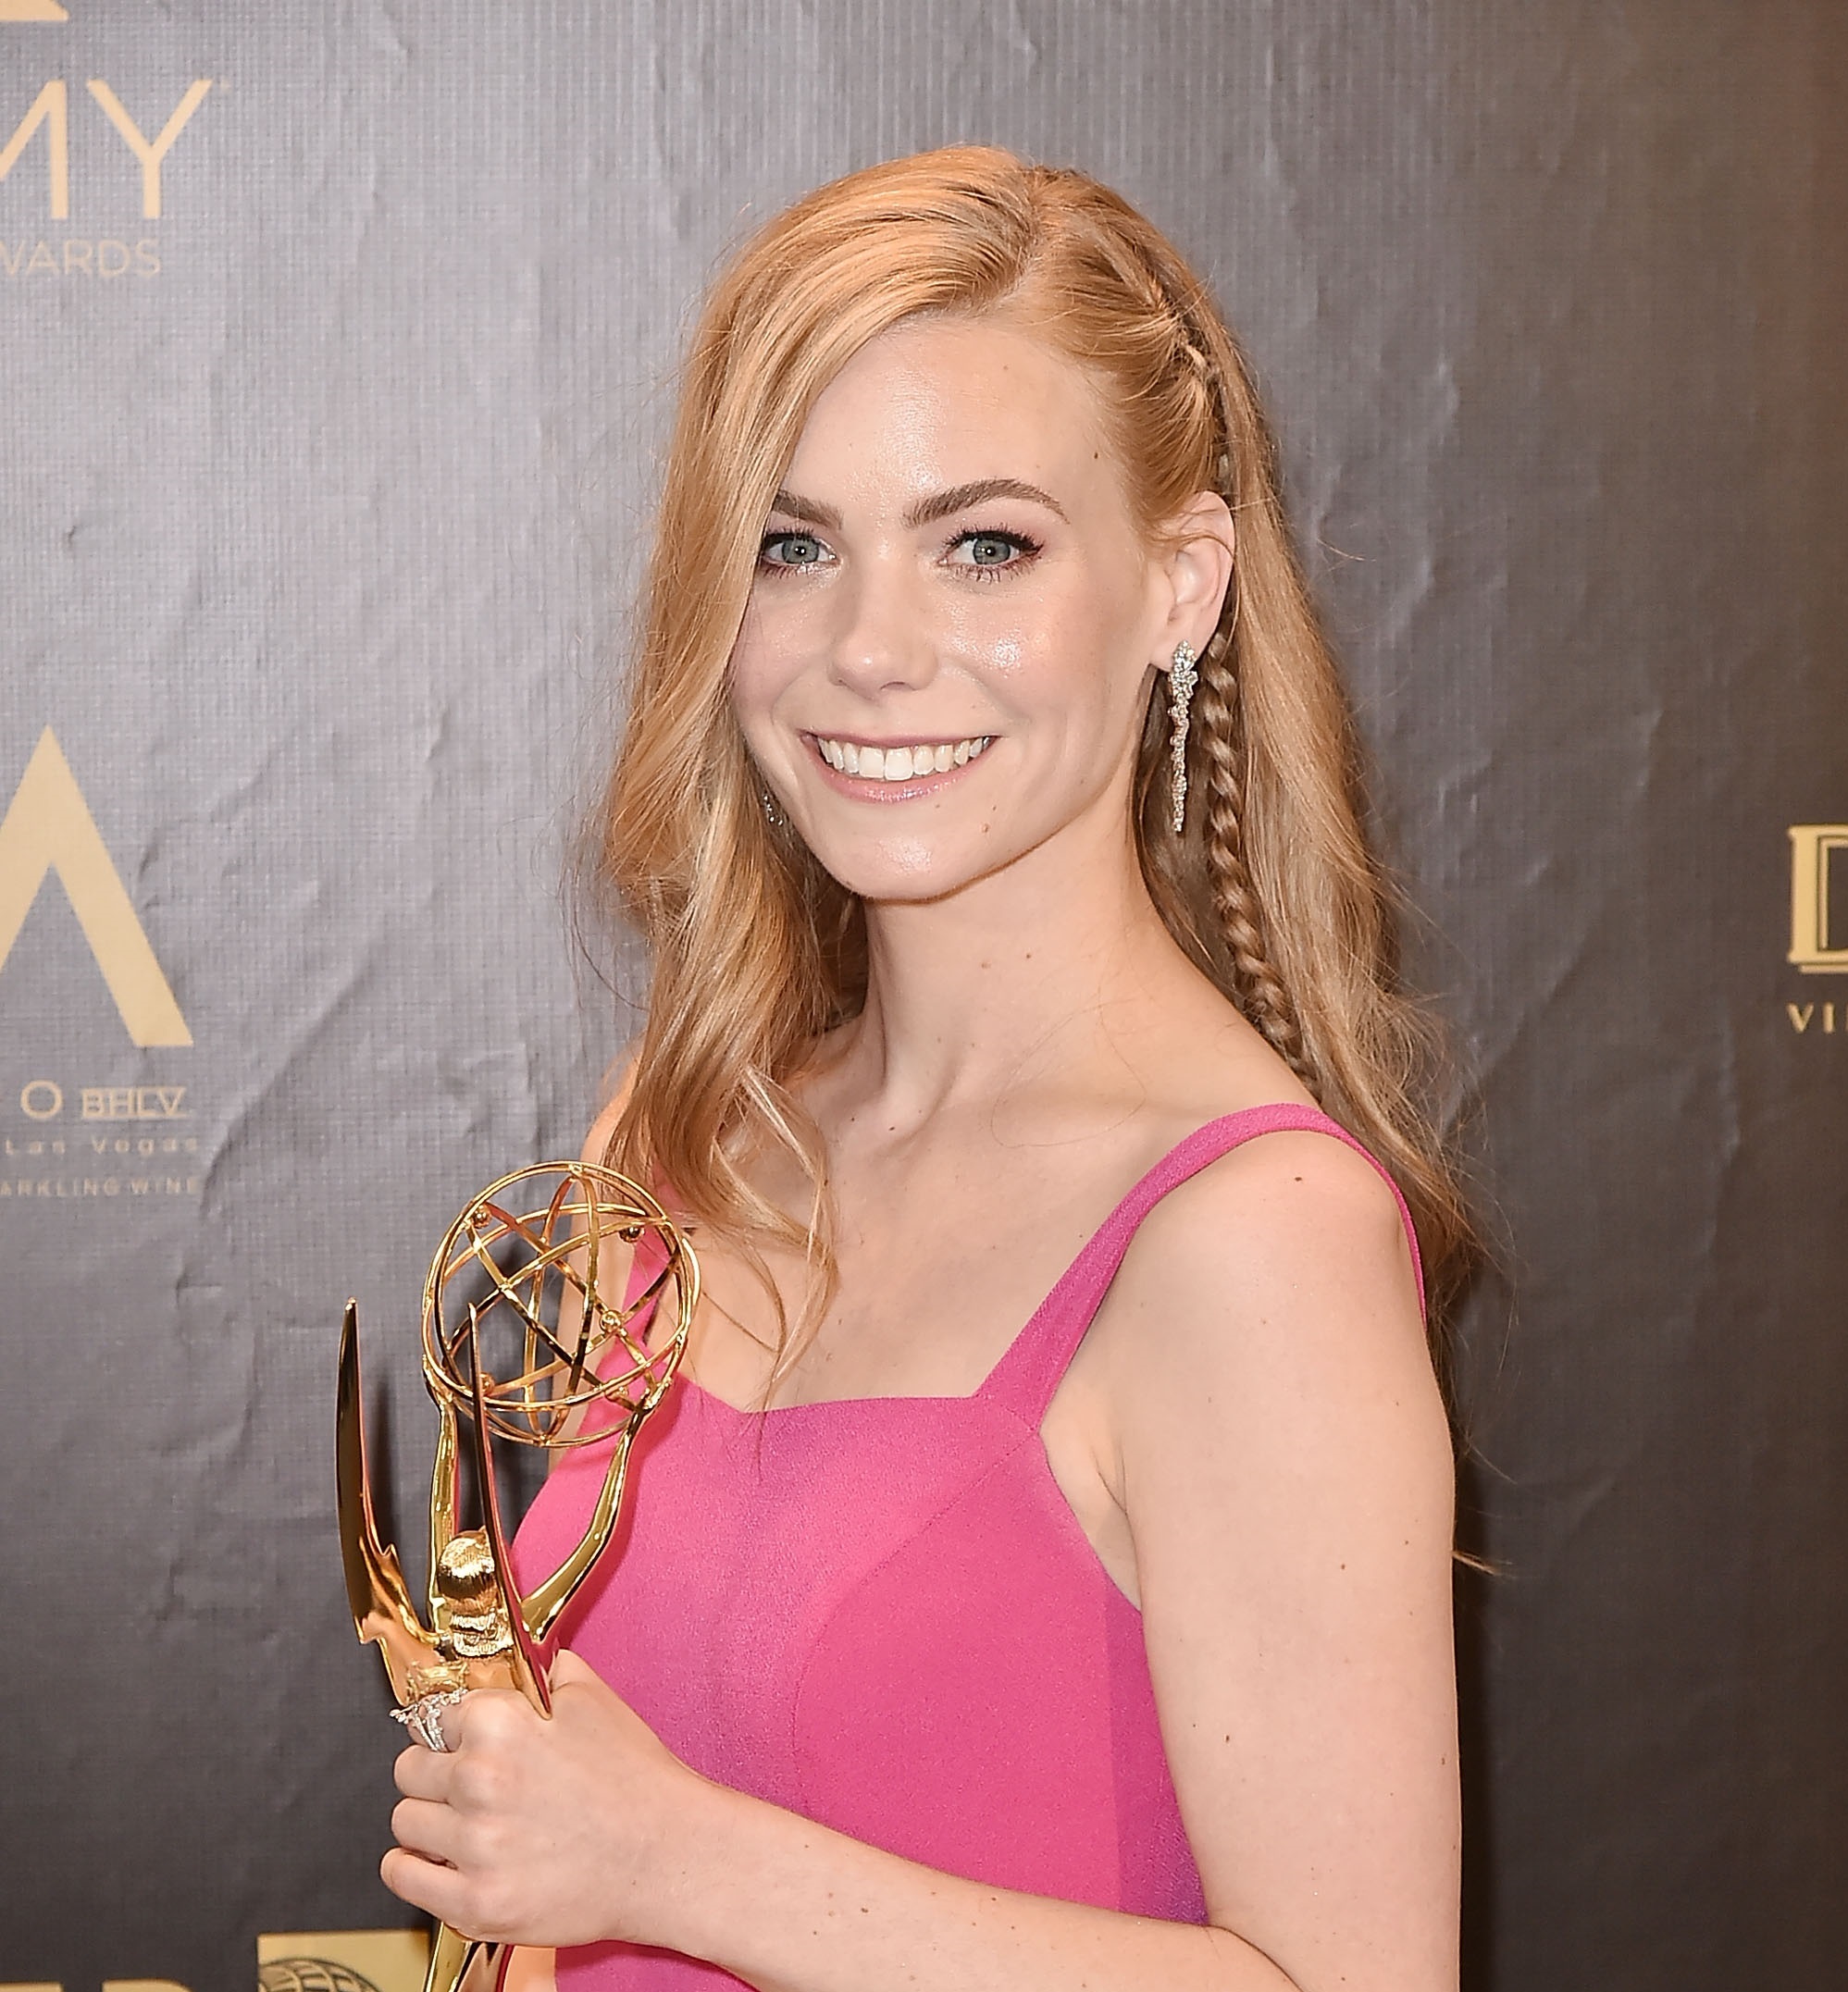 'General Hospital' star Chloe Lanier wearing a pink dress and holding her Daytime Emmy award.